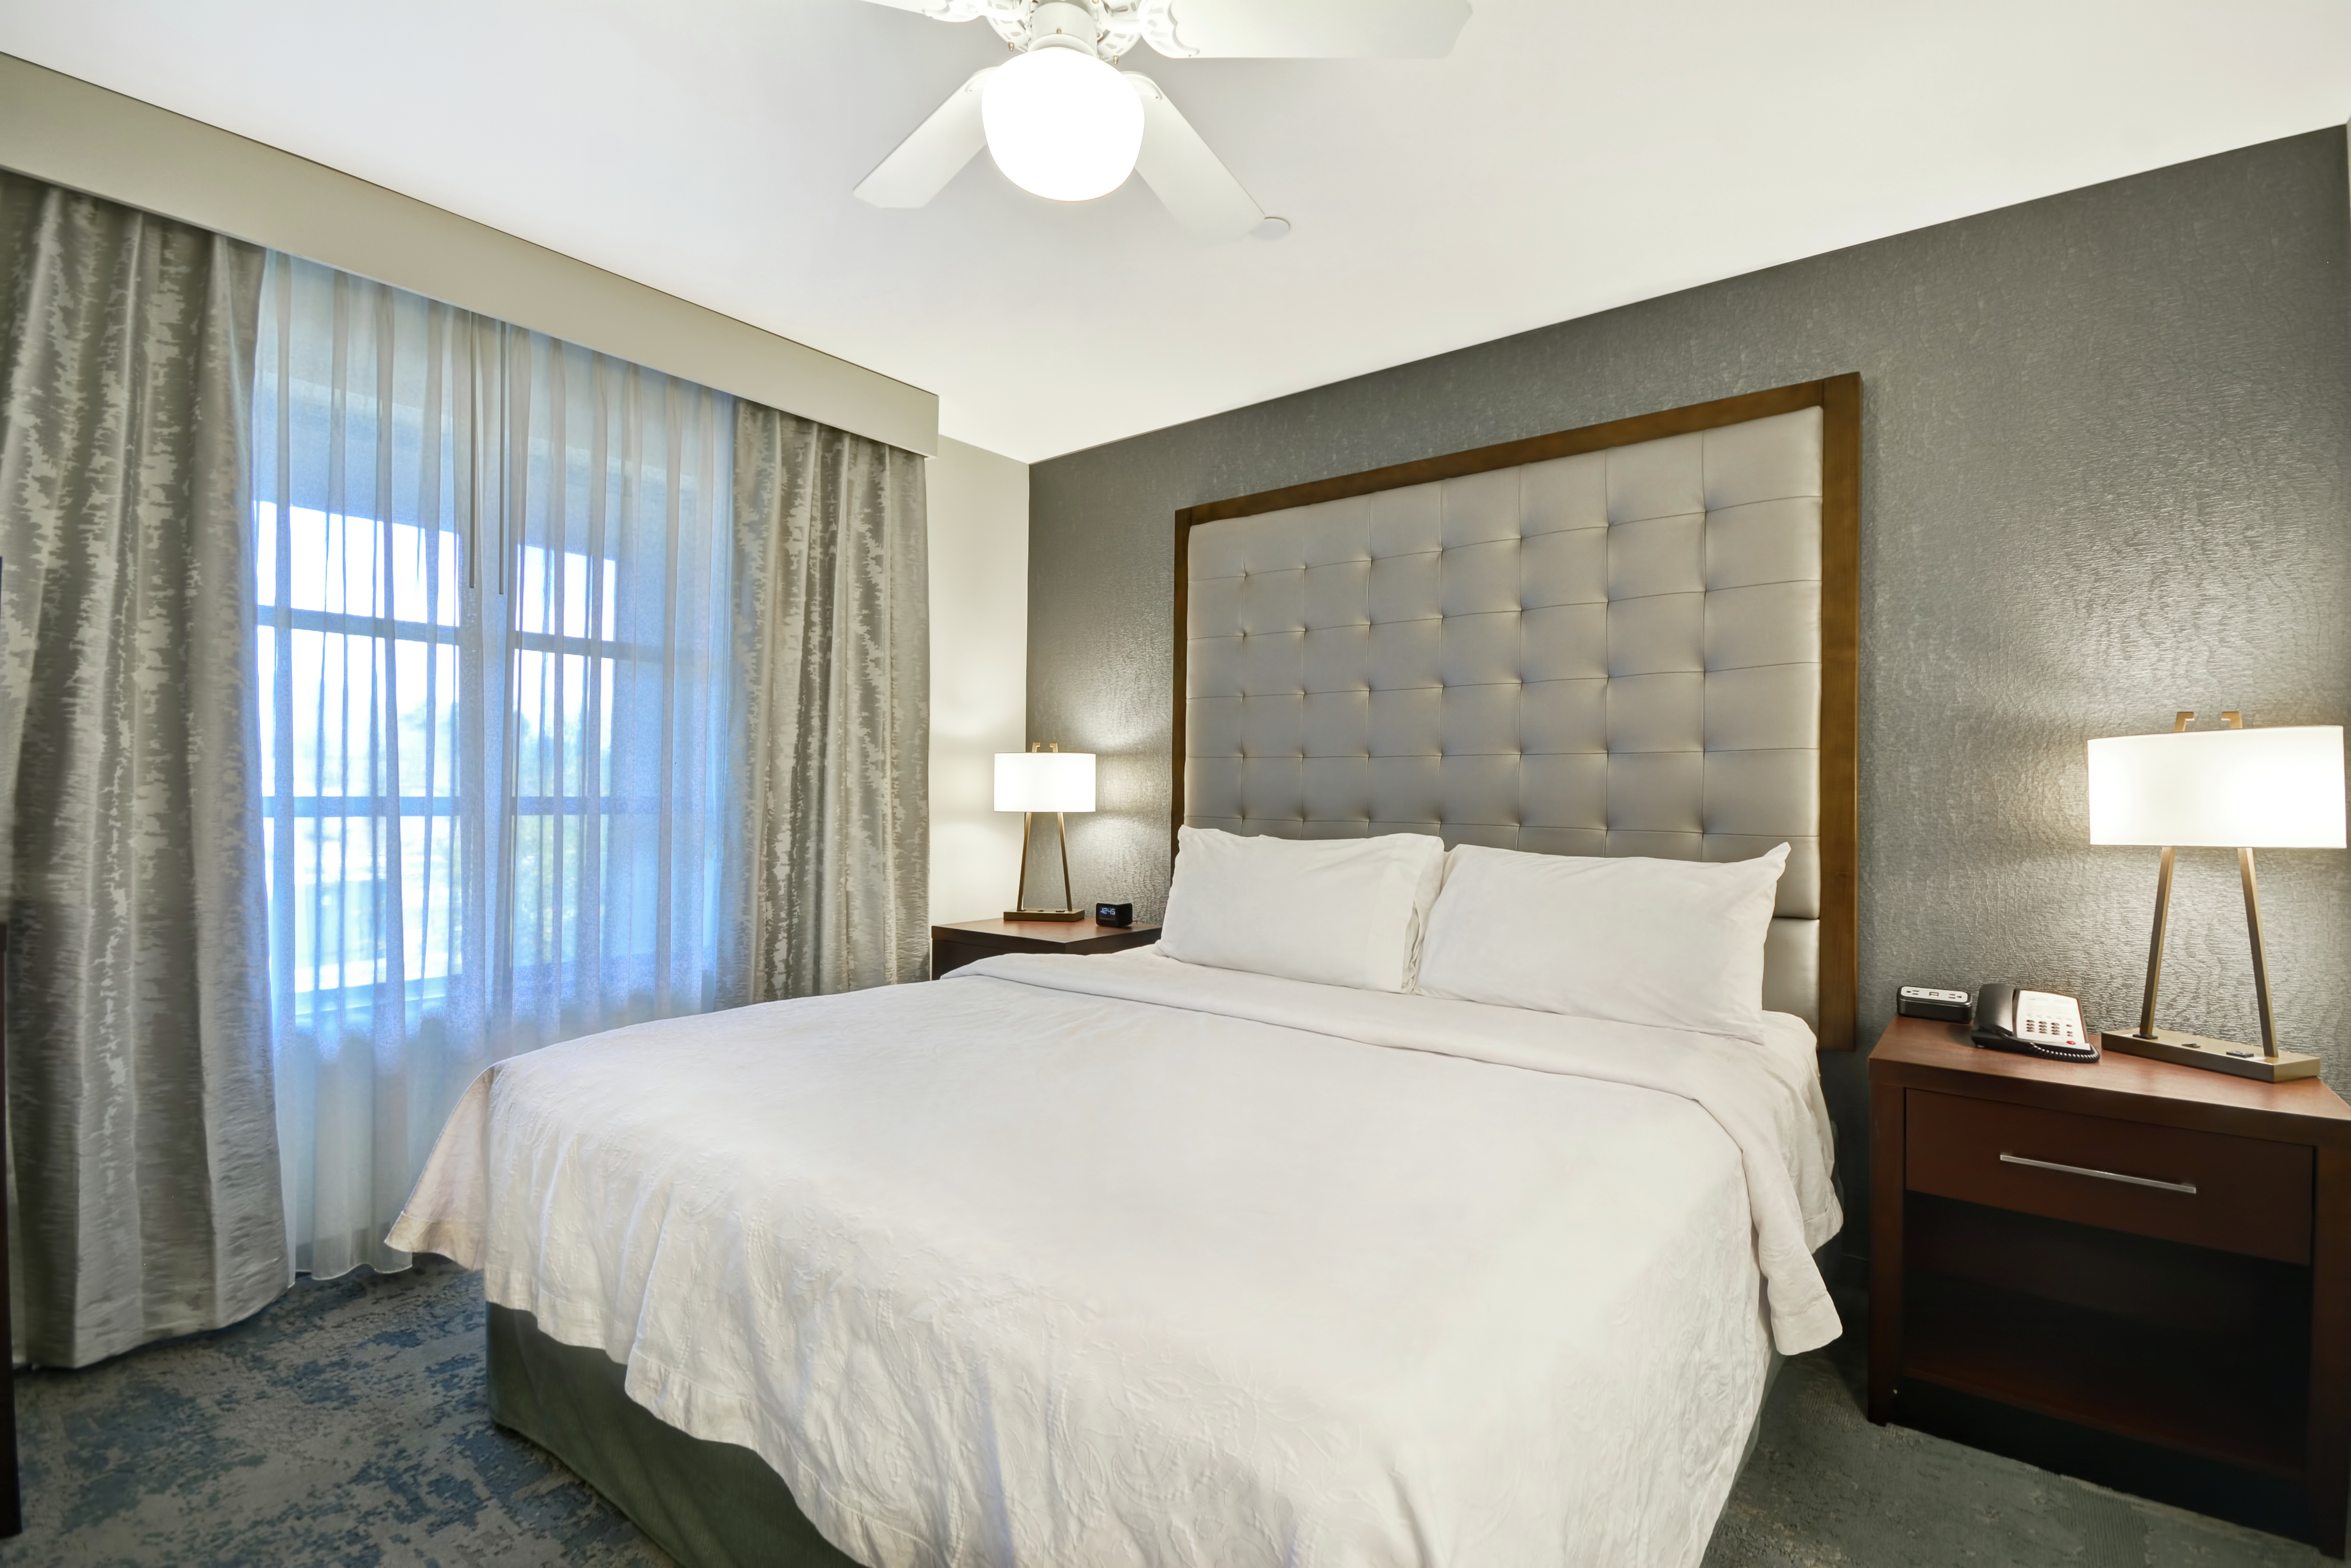 King Bed Between Two Illuminated Lamps by Large Window With Long Drapes and Ceiling Fan in Studio Suite